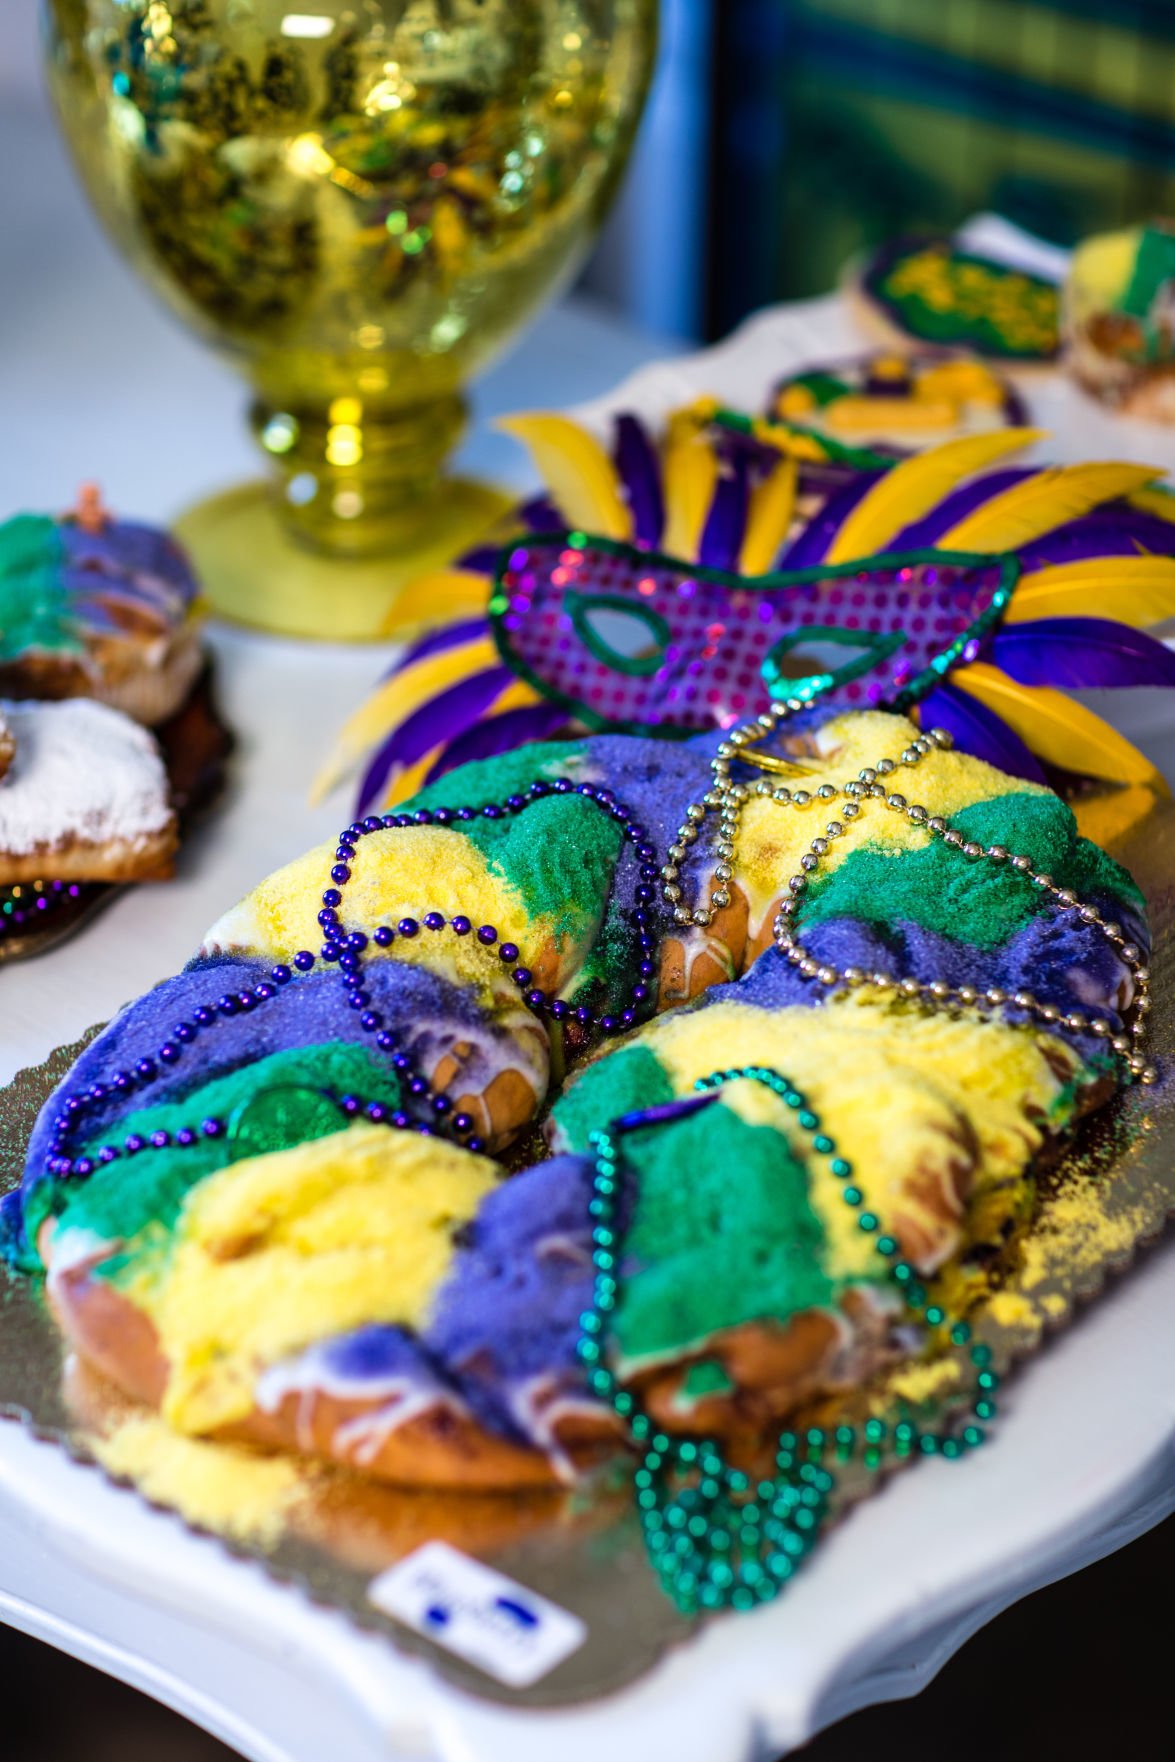 Celebrate Mardi Gras in Tulsa with events, specials and Cajun food specialties Entertainment